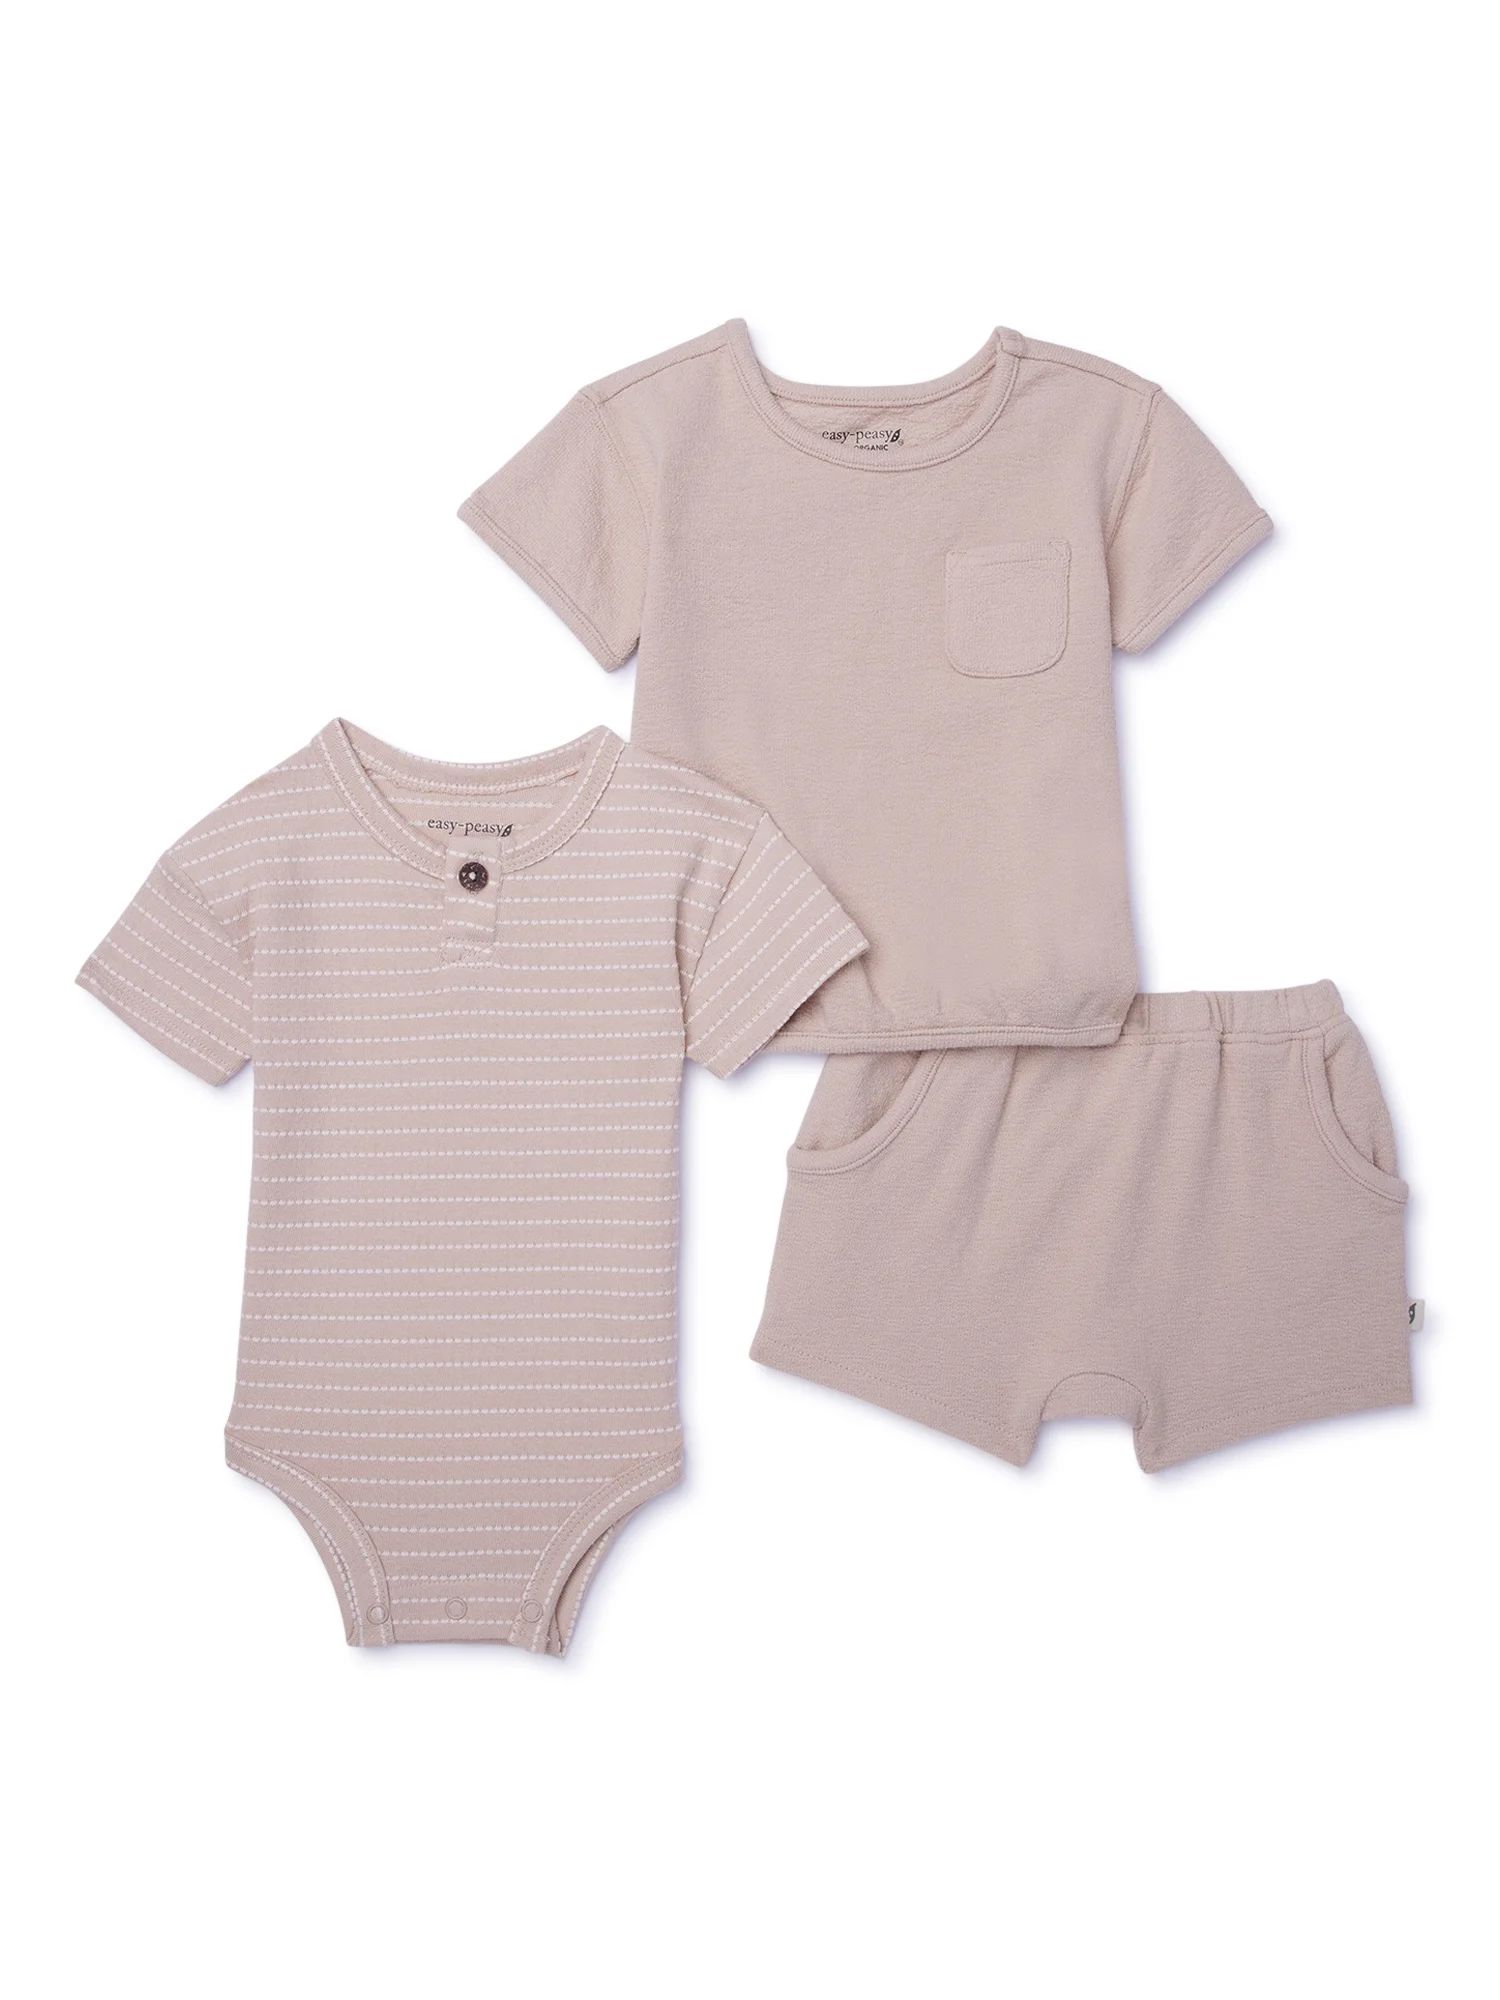 easy-peasy Baby Short Sleeve Tops and Short Outfit Set, 3-Piece, Sizes 0-24 Months | Walmart (US)